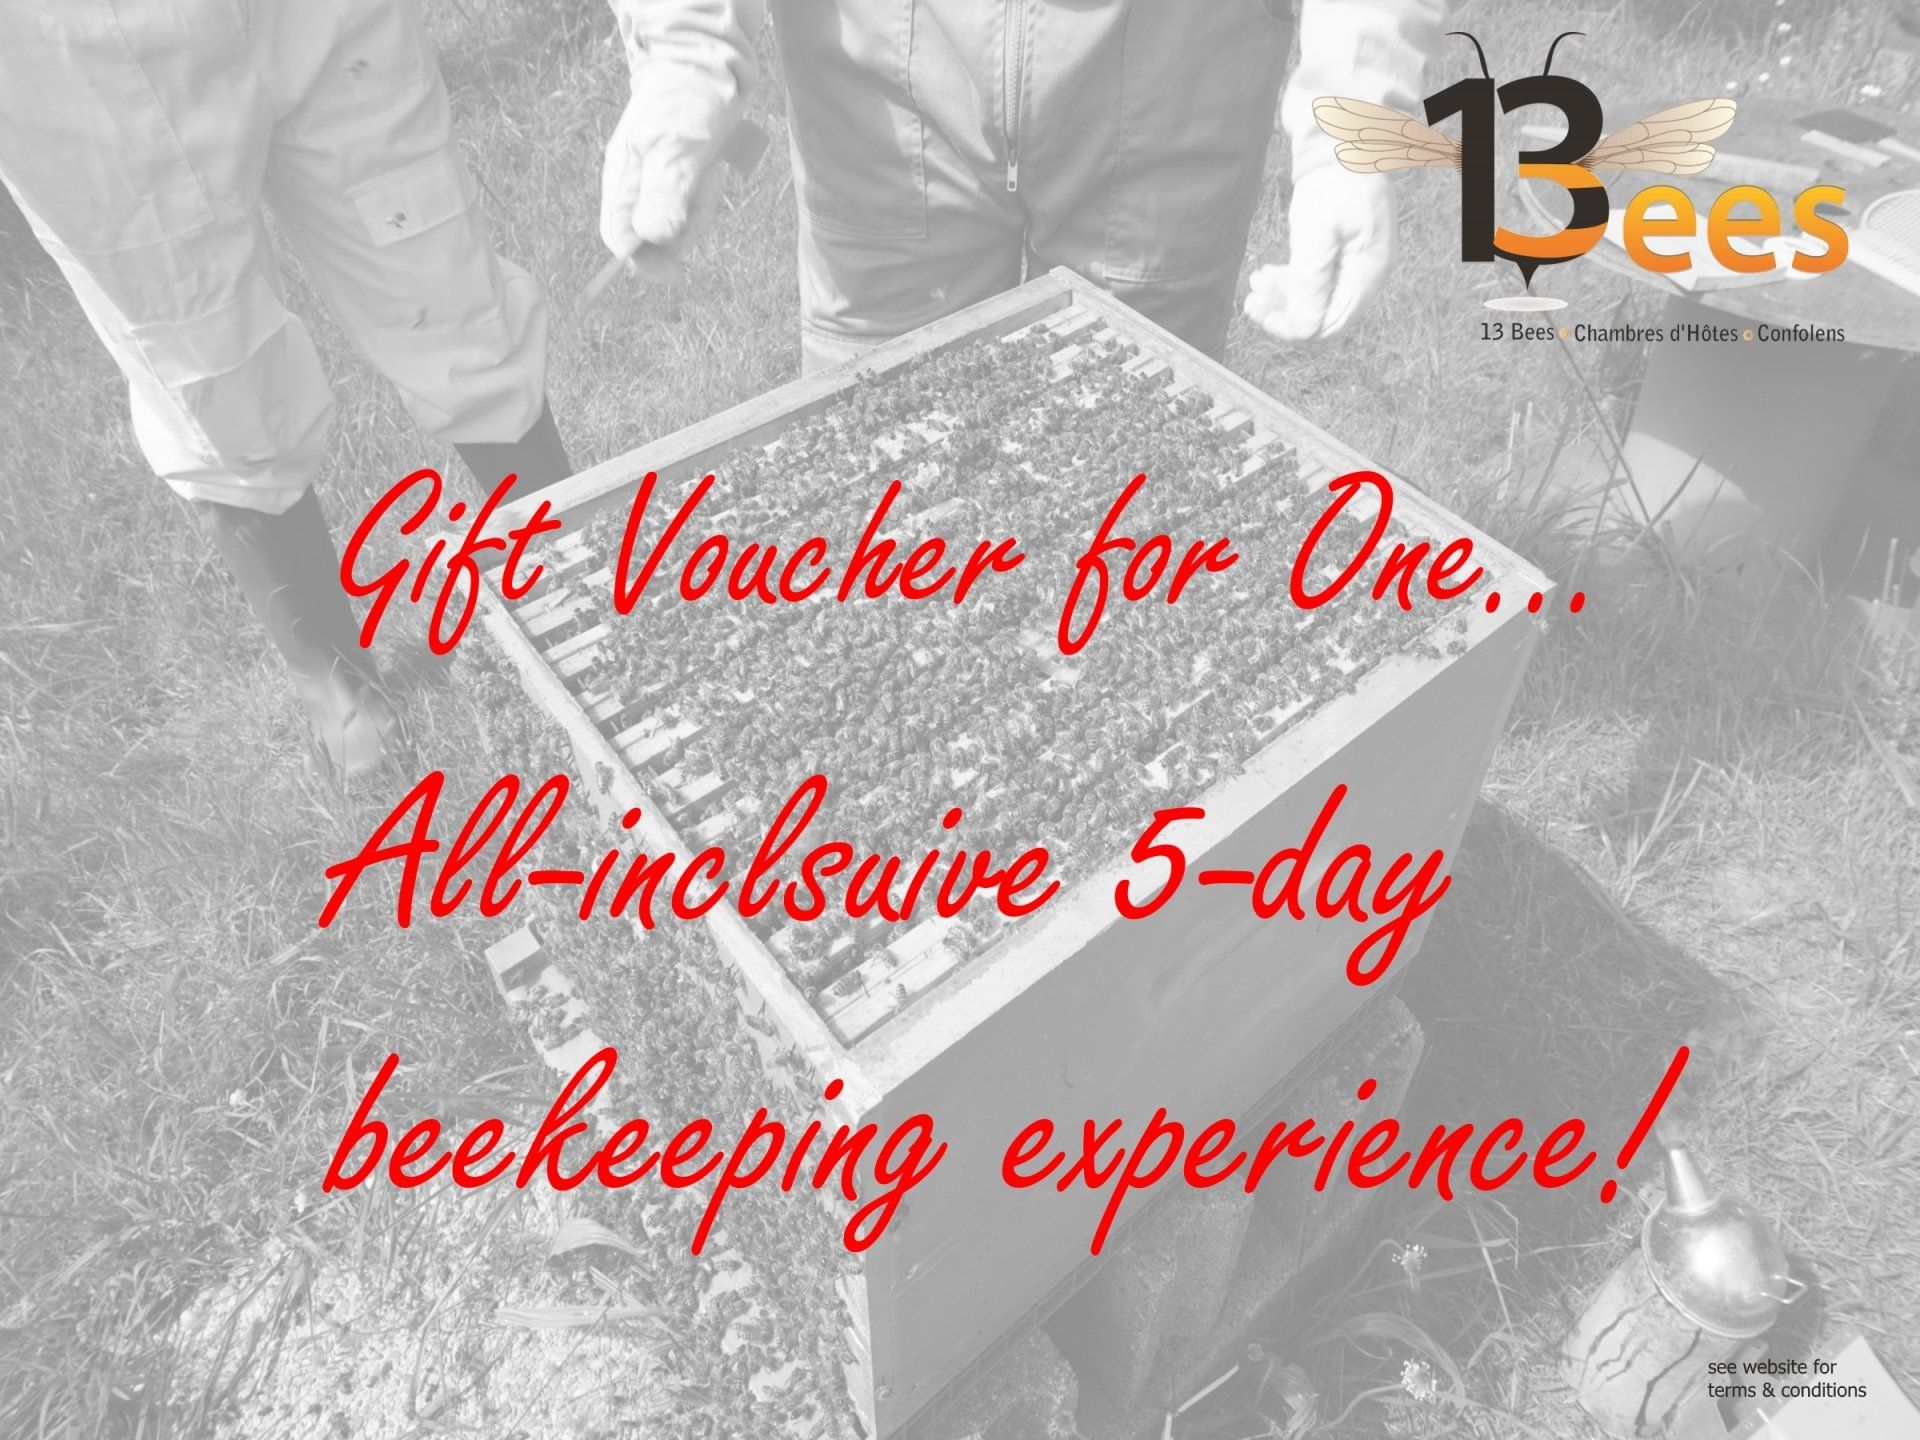 6-day beekeeping experience gift voucher